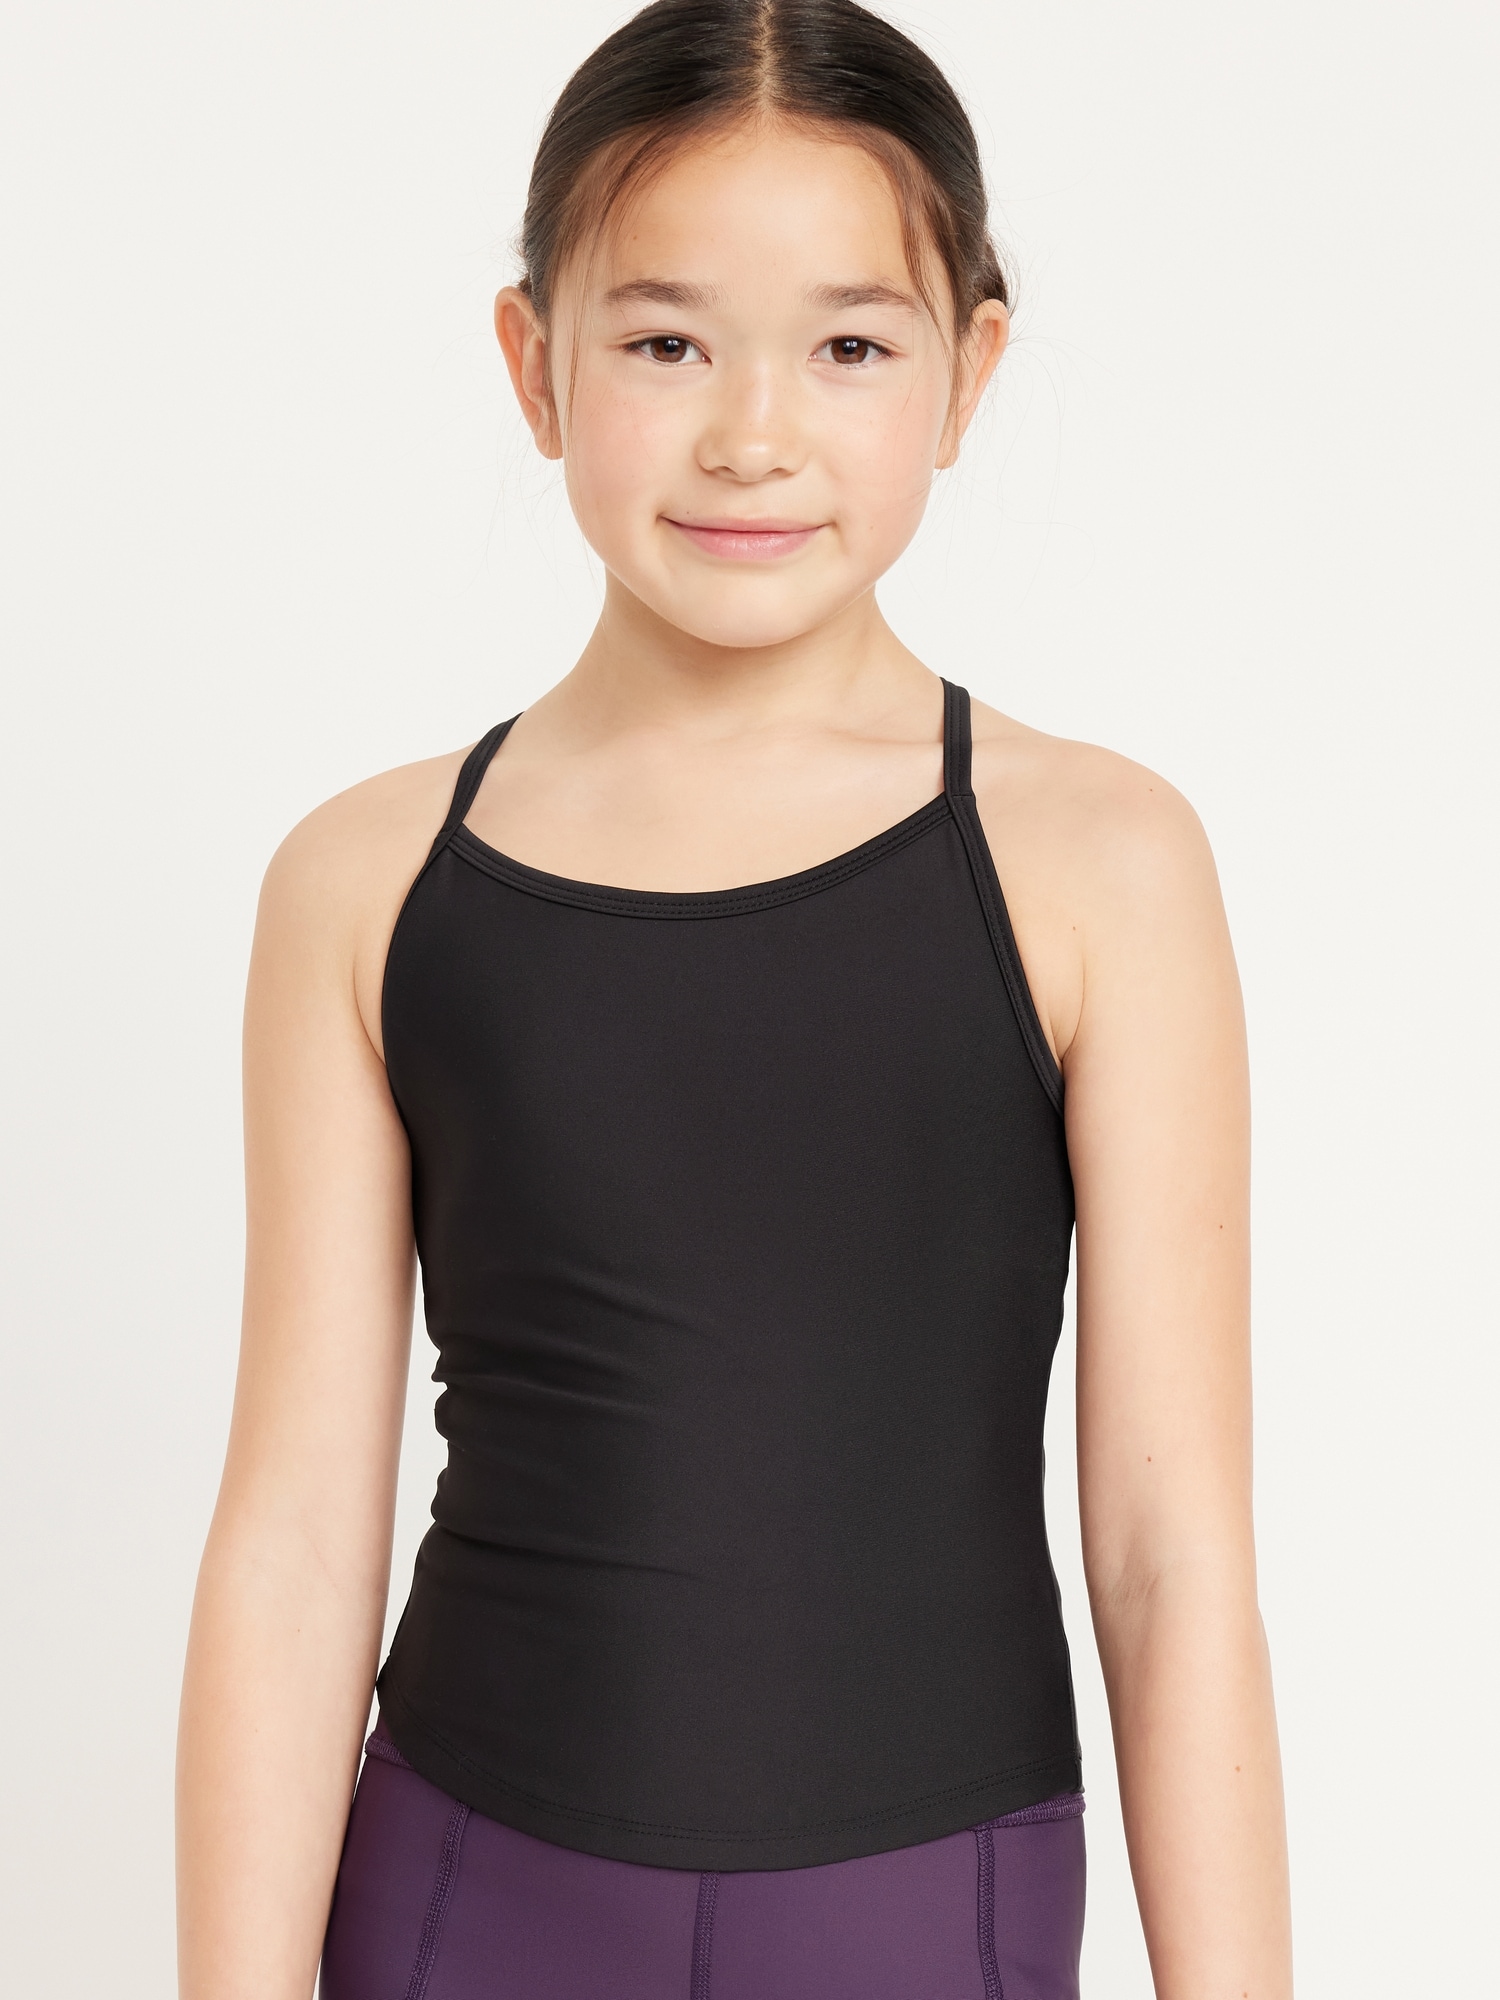 PowerSoft Fitted Cross-Back Tank Top for Girls Hot Deal